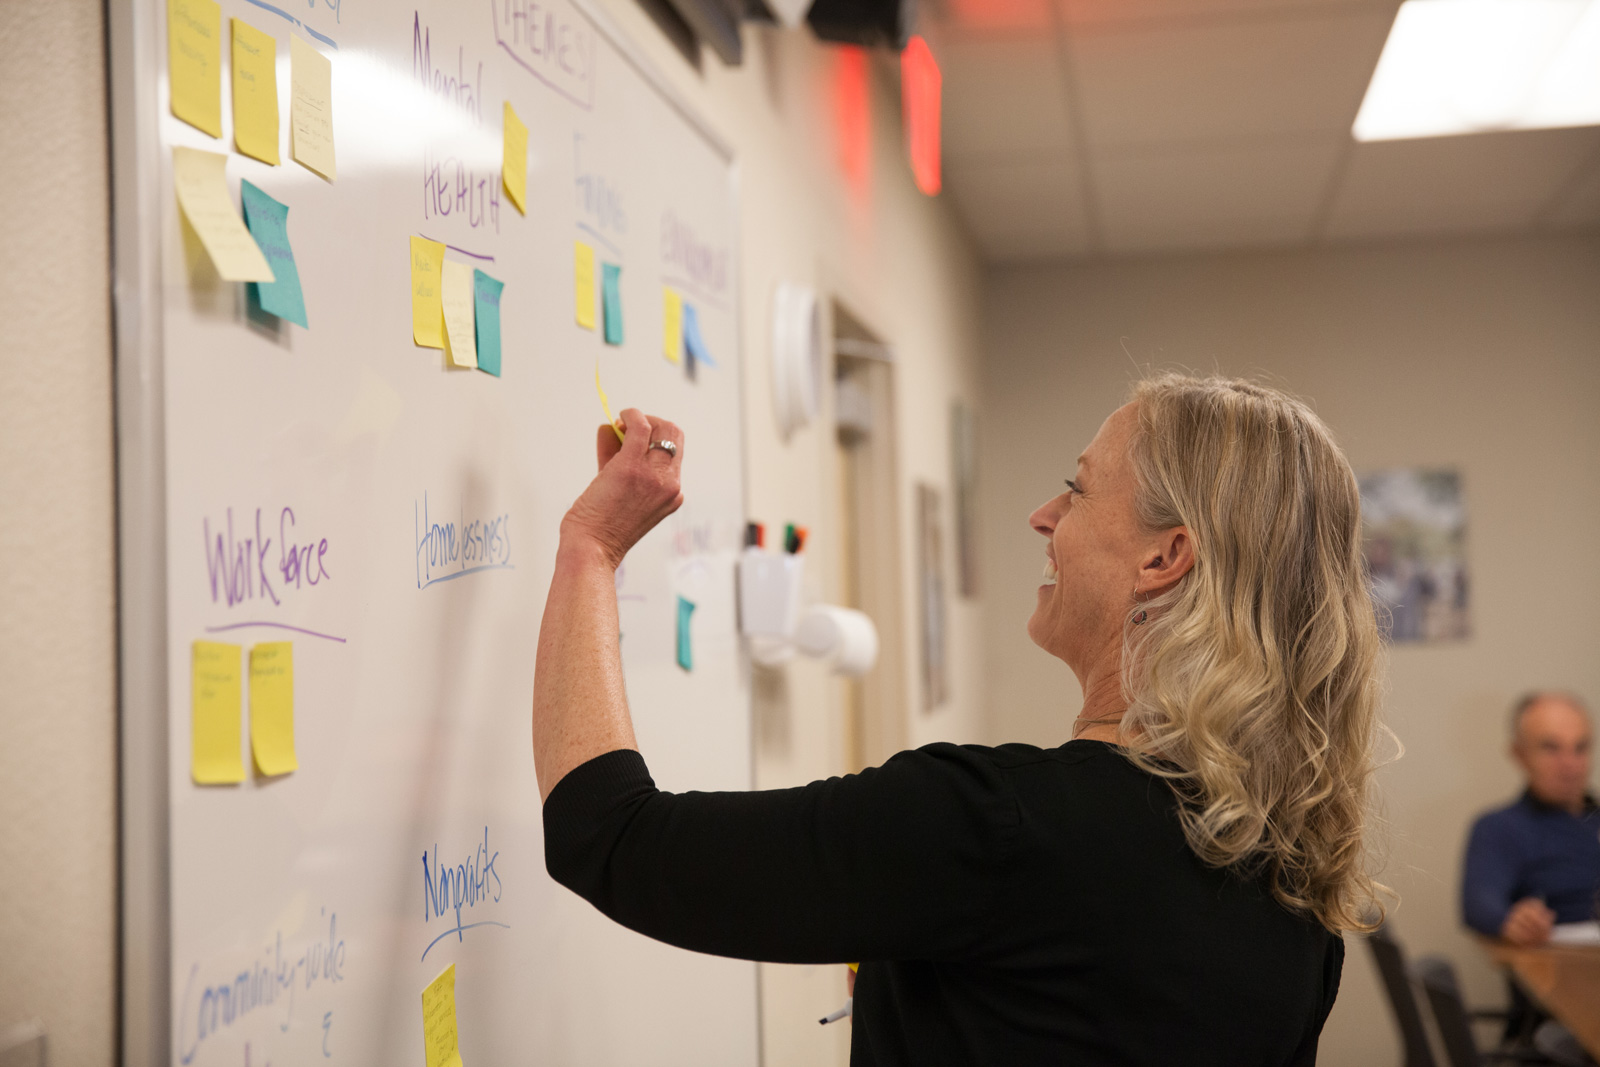 Karin Demarest stands in front of a white board covered in sticky notes, she is arranging them into categories, including workforce, mental health, homelessness, nonprofits.